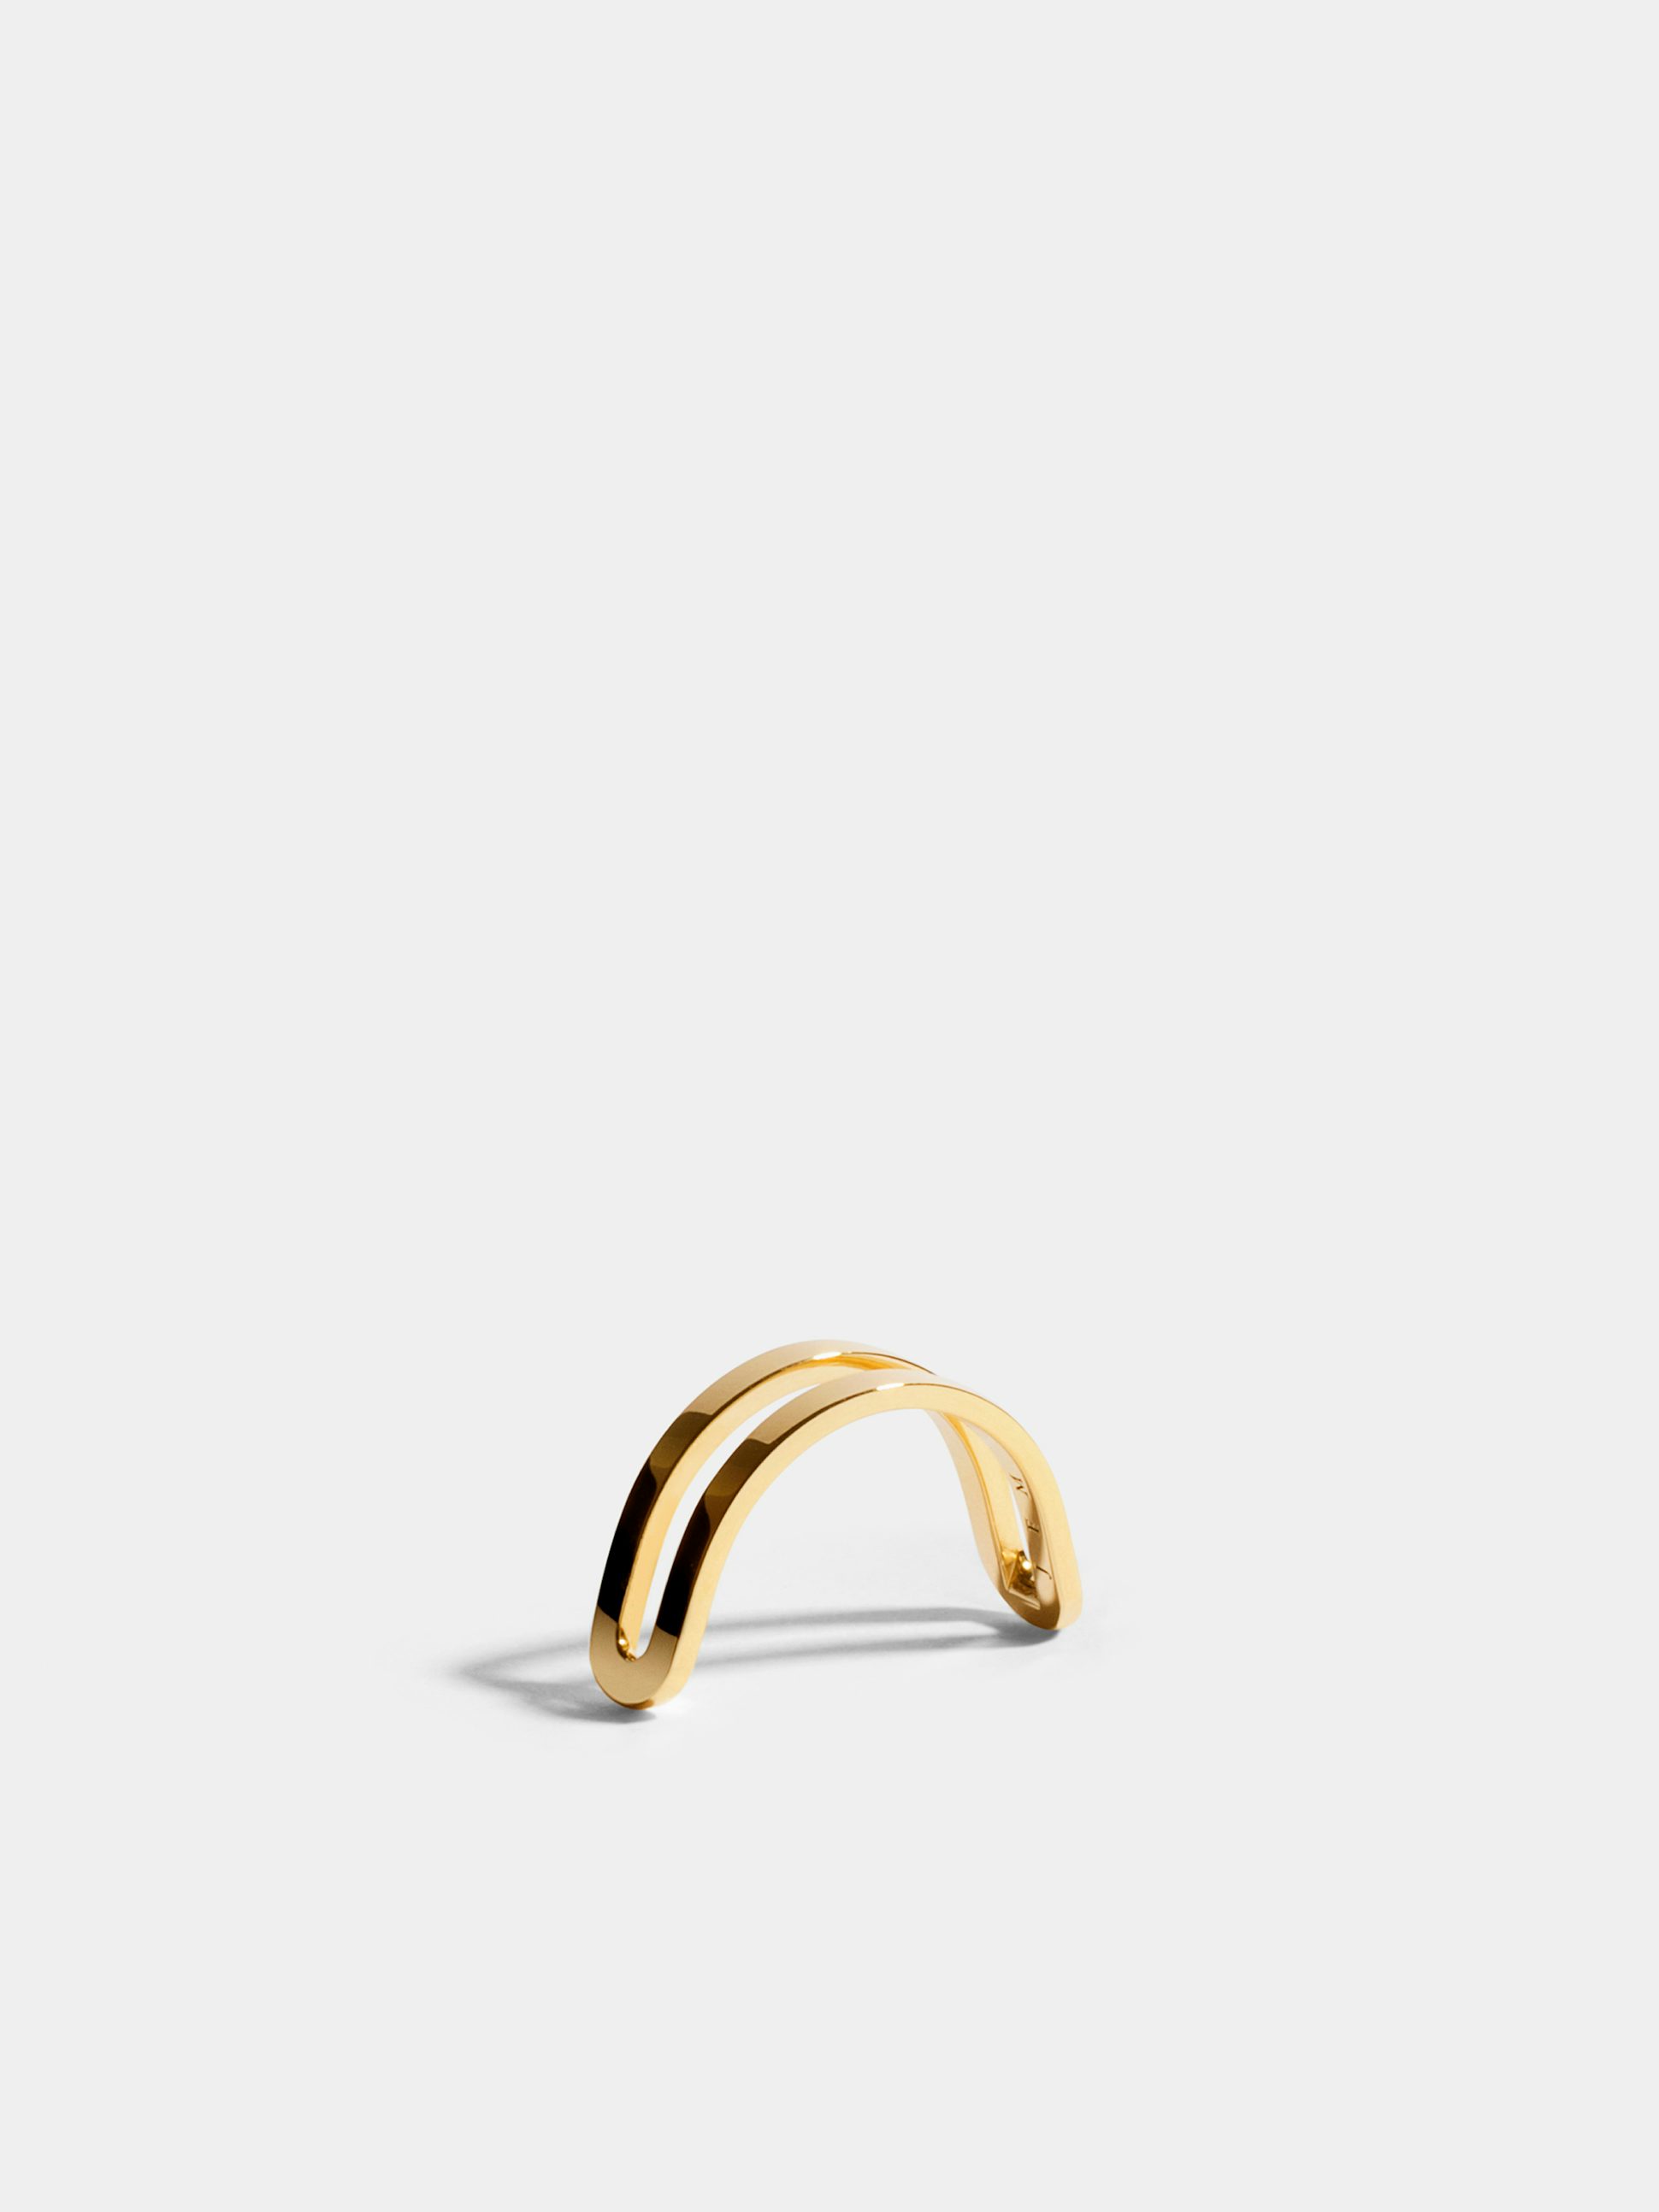 Simple two finishes Étreintes rings